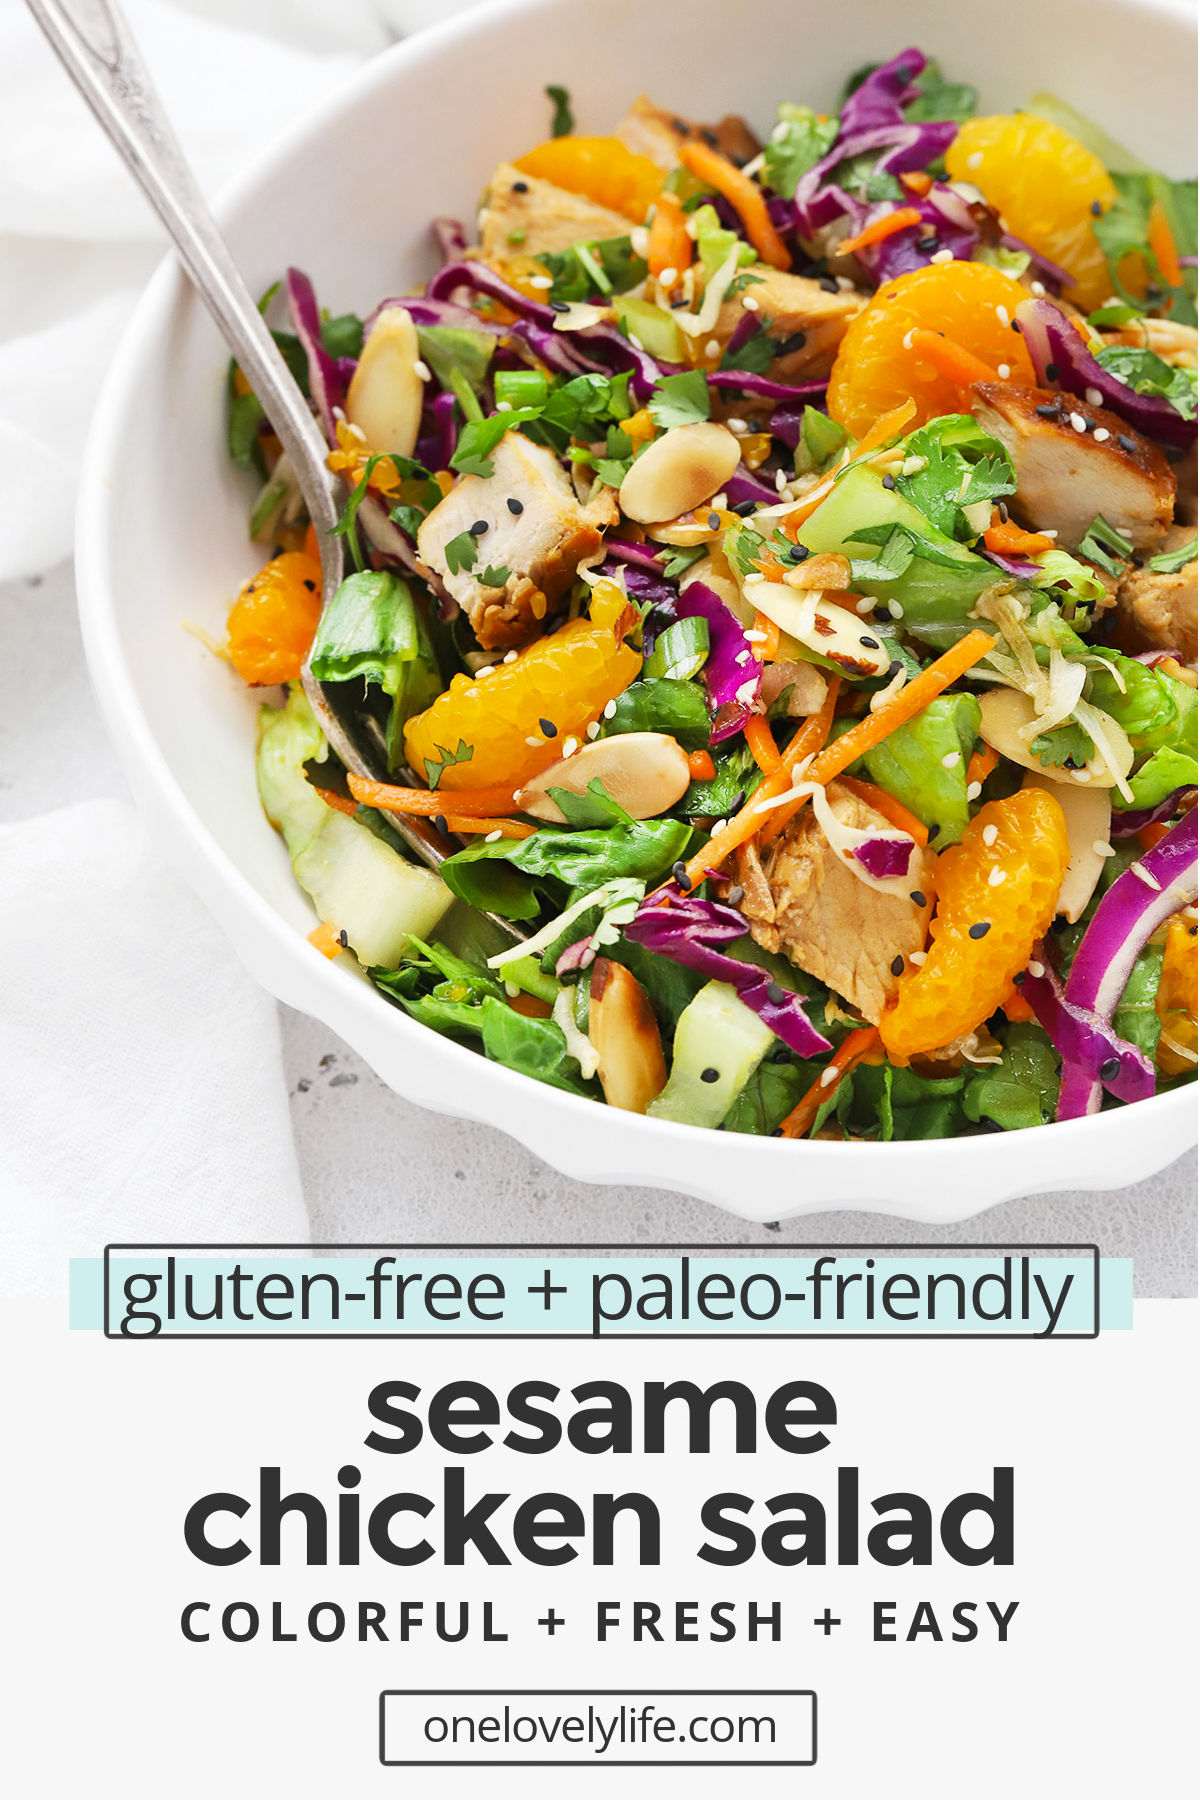 Sesame Chicken Salad - With tender sesame marinated chicken, colorful veggies, and a delicious sesame dressing, this sesame chicken salad is one of our favorite healthy dinners! (Gluten-Free, Paleo-Friendly) // Healthy sesame chicken salad // paleo sesame chicken salad // main dish salad // dinner salad // healthy dinner // healthy lunch